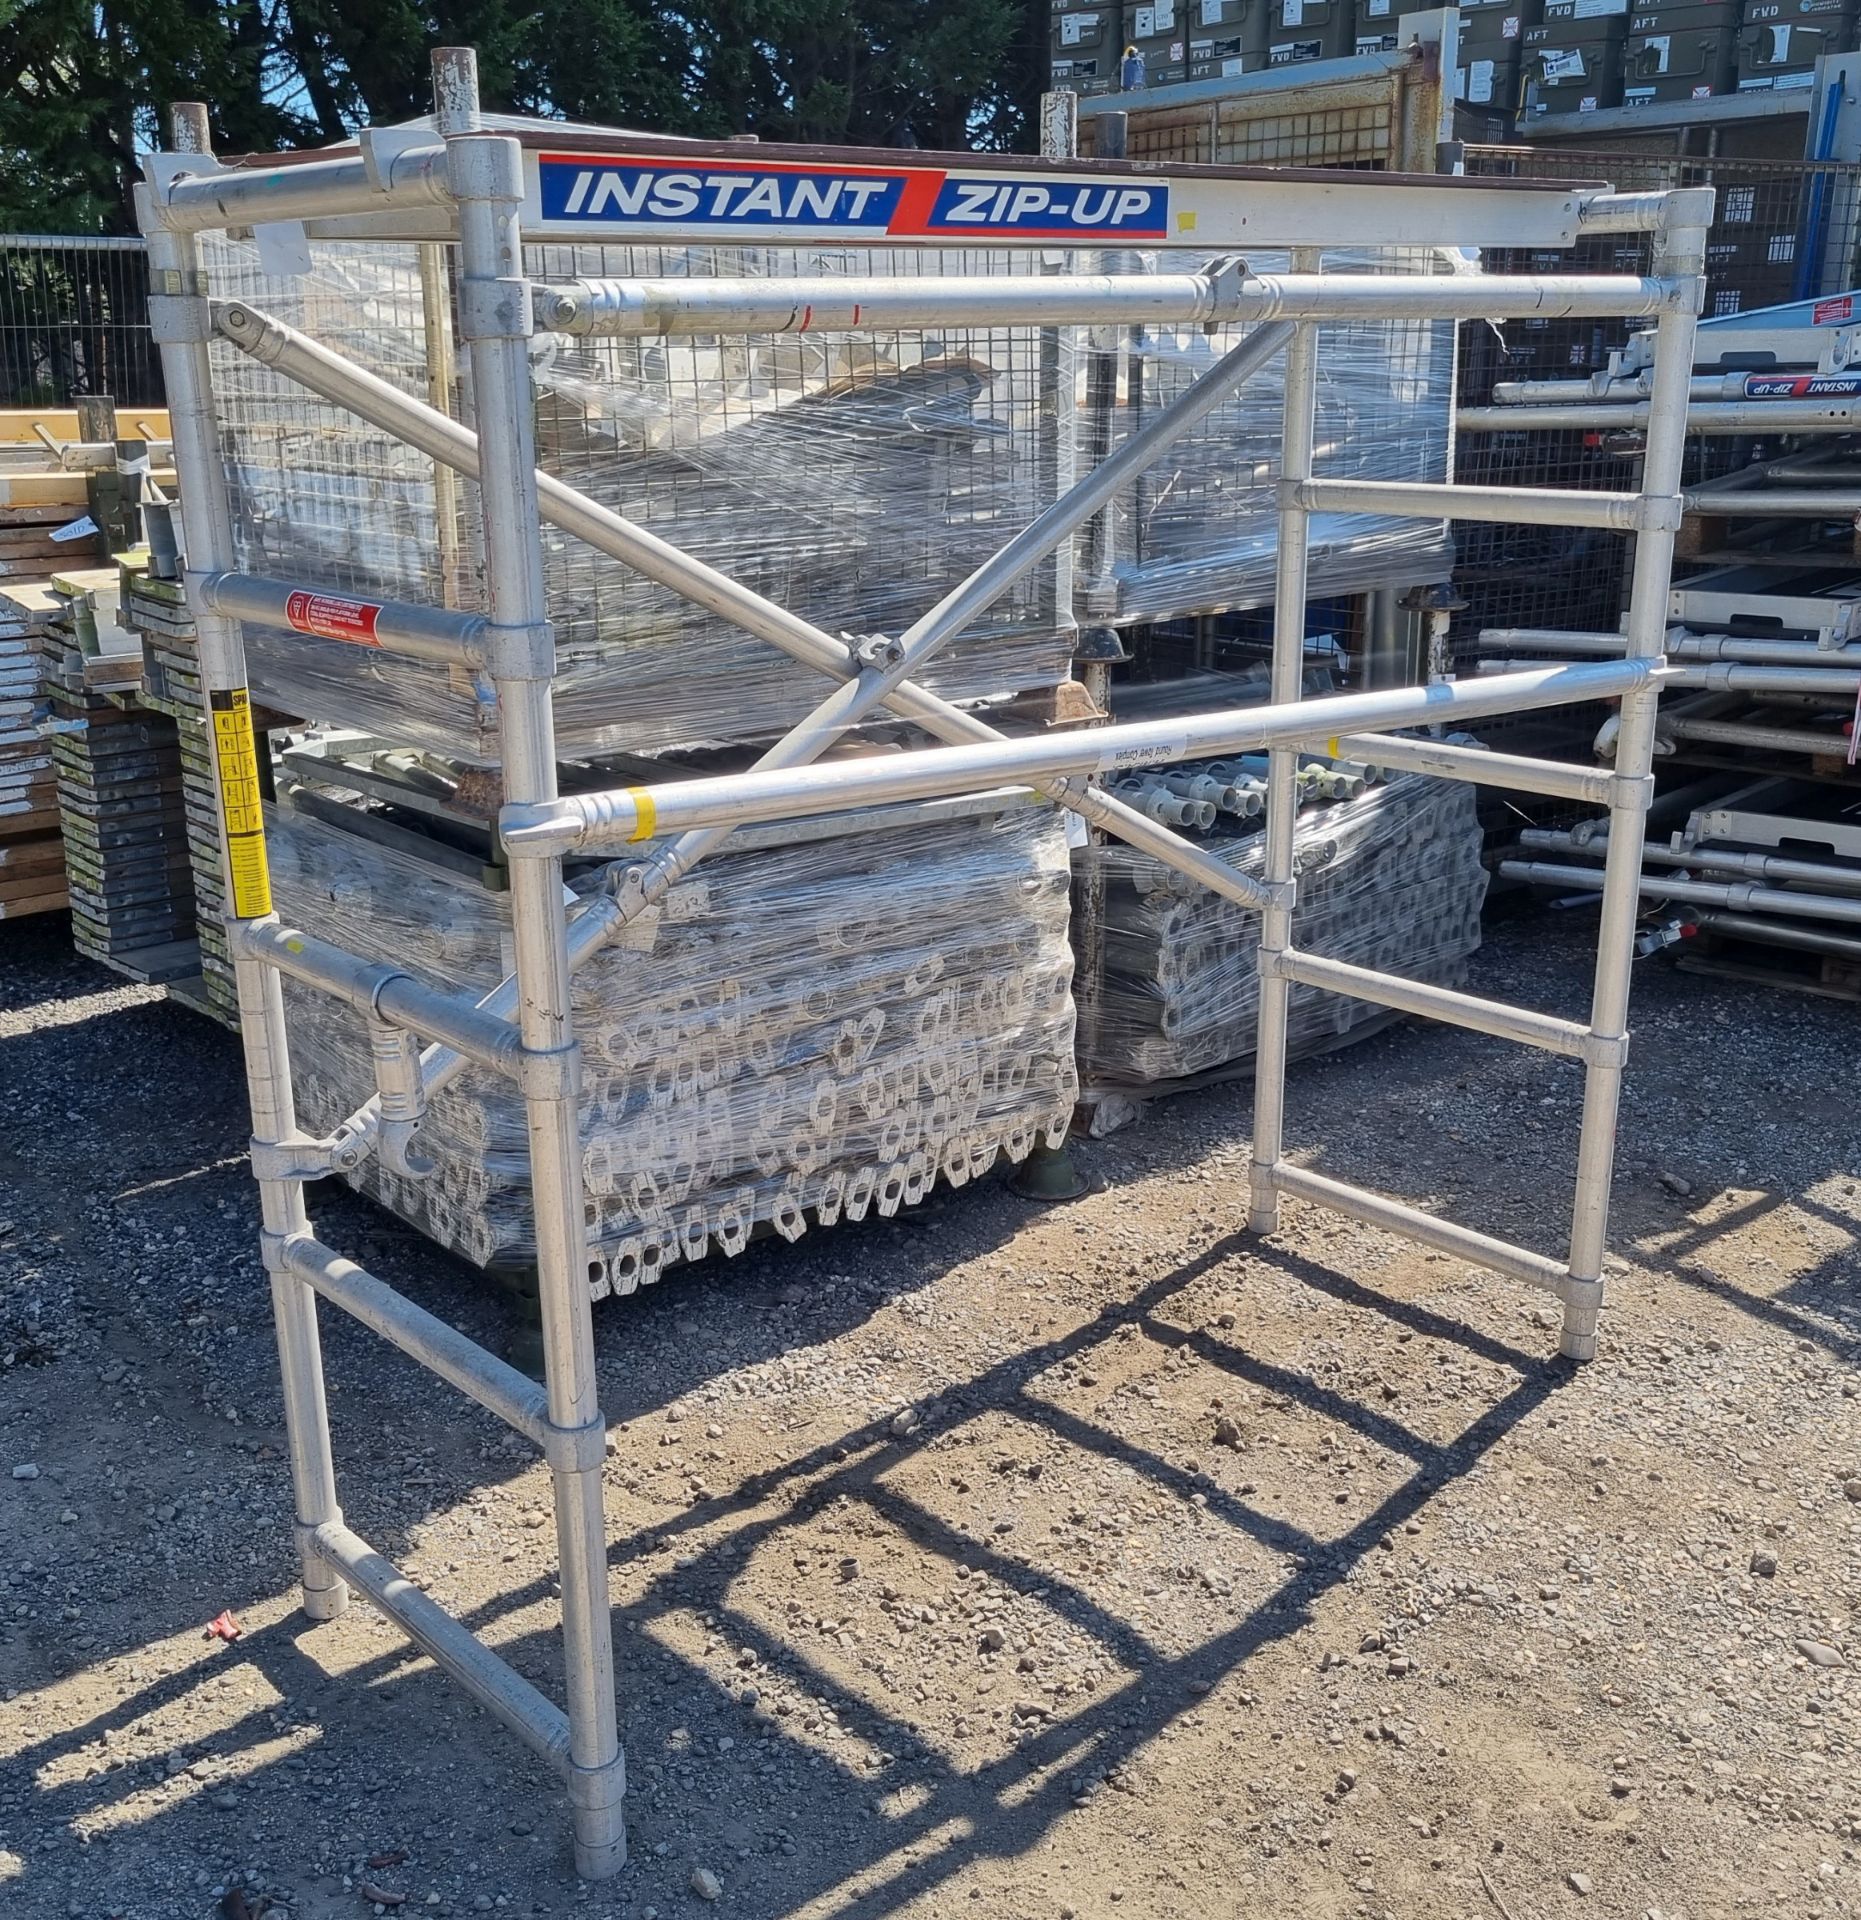 Scaffolding Tower Consisting of - Instant zip-up Scaffold tower platform L200 x W61 x H8.5cm, Instan - Image 4 of 4